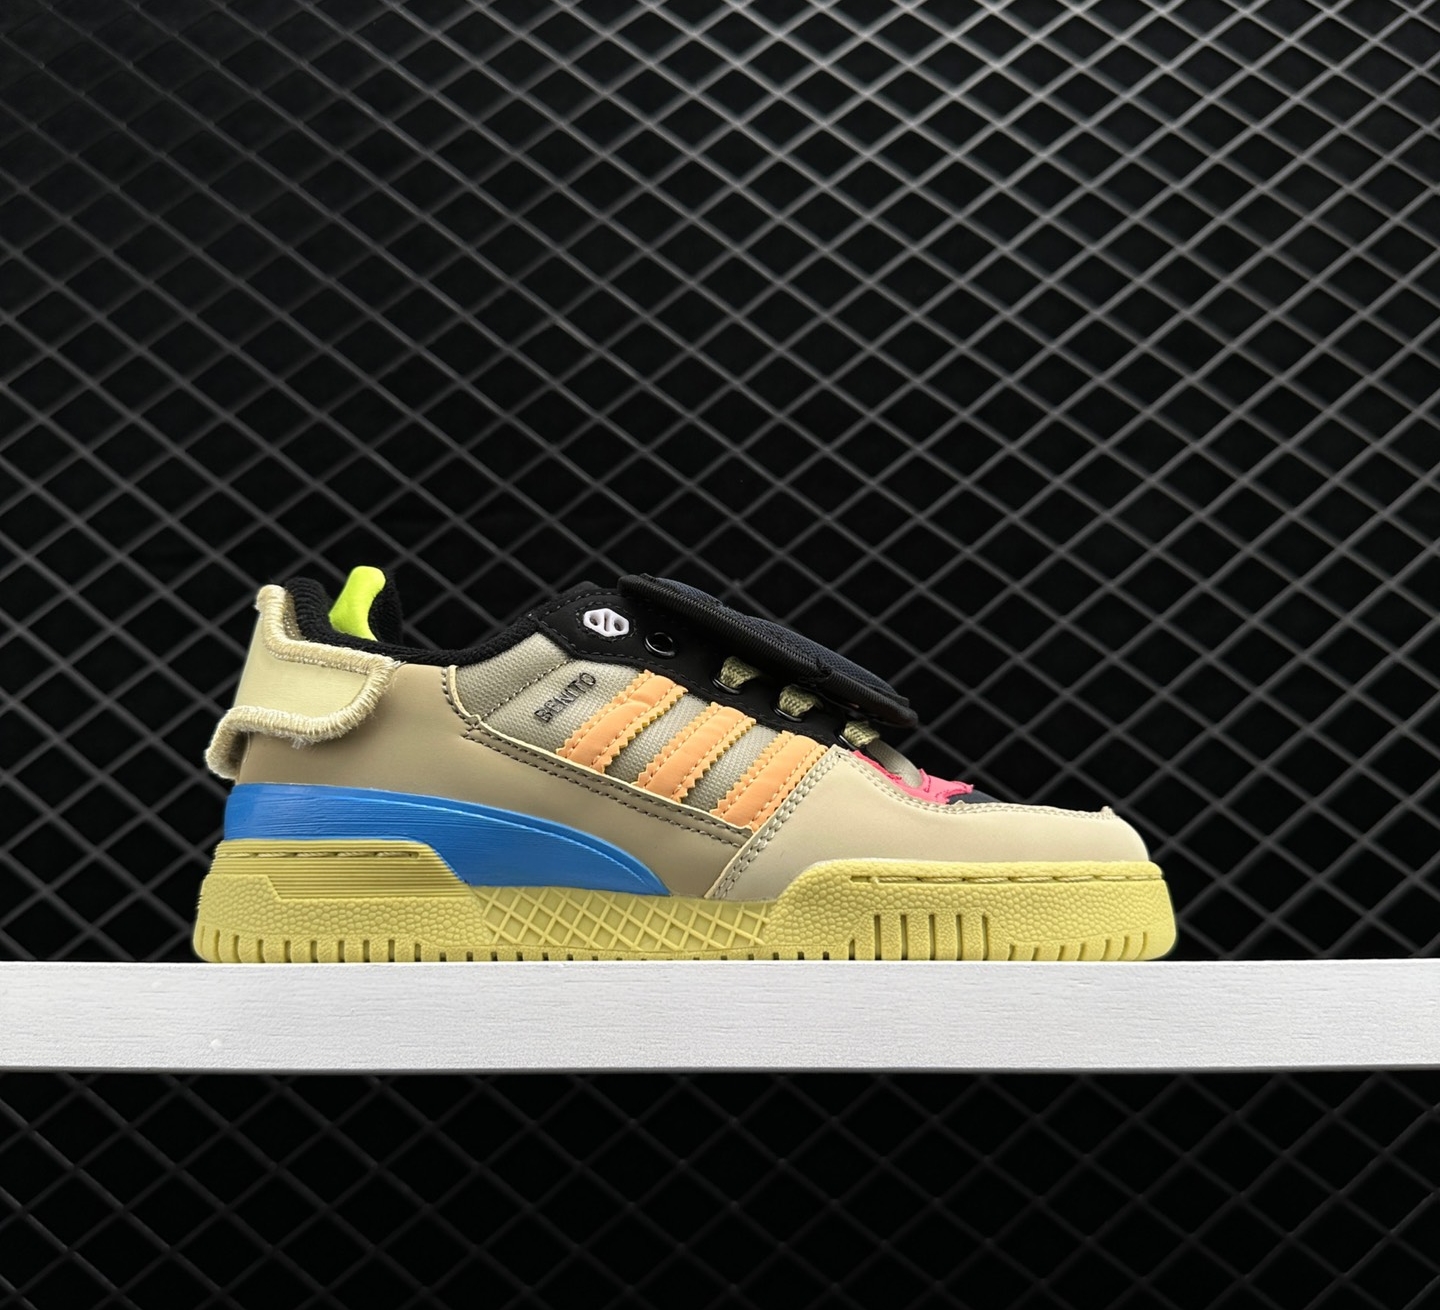 Adidas Bad Bunny x Forum Powerphase 'Catch and Throw' GZ2009: Exclusive Collab Sneakers